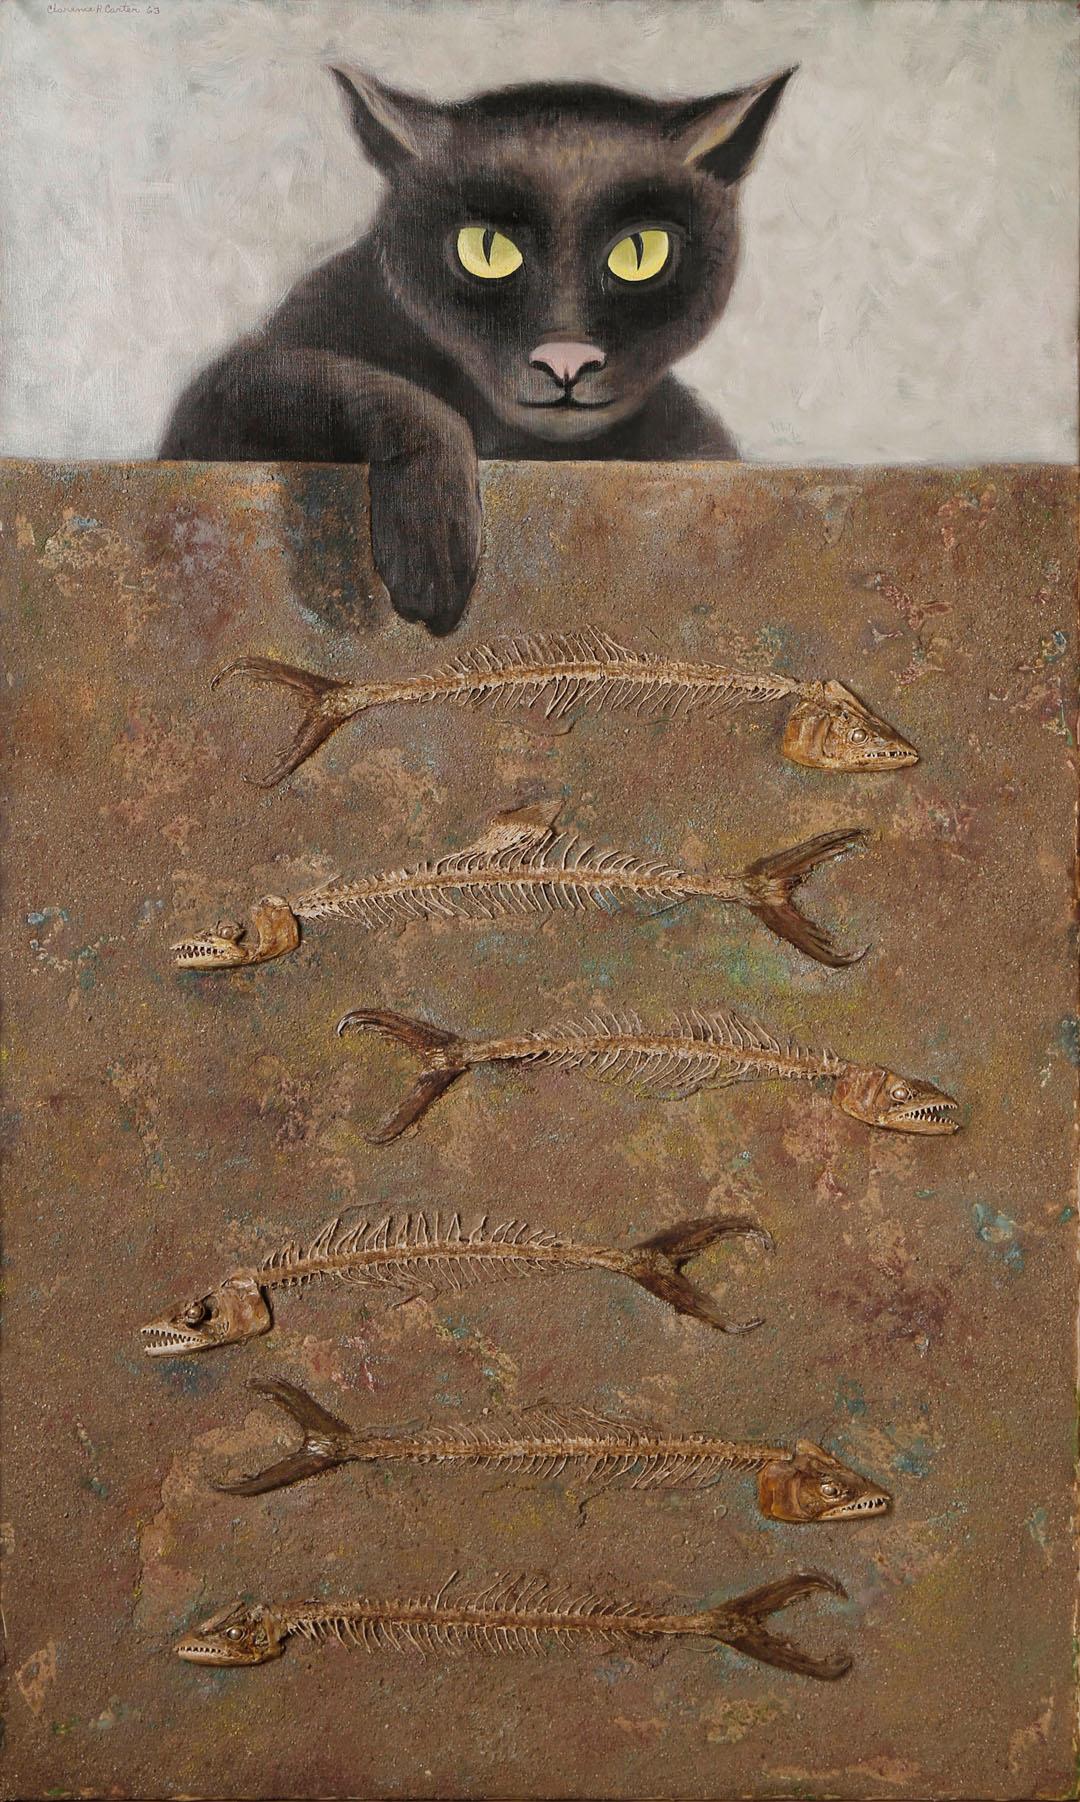 Over and Above: No. 6, Surreal Cat w/ Fish Bones, 20th Century Cleveland School - Painting by Clarence Holbrook Carter